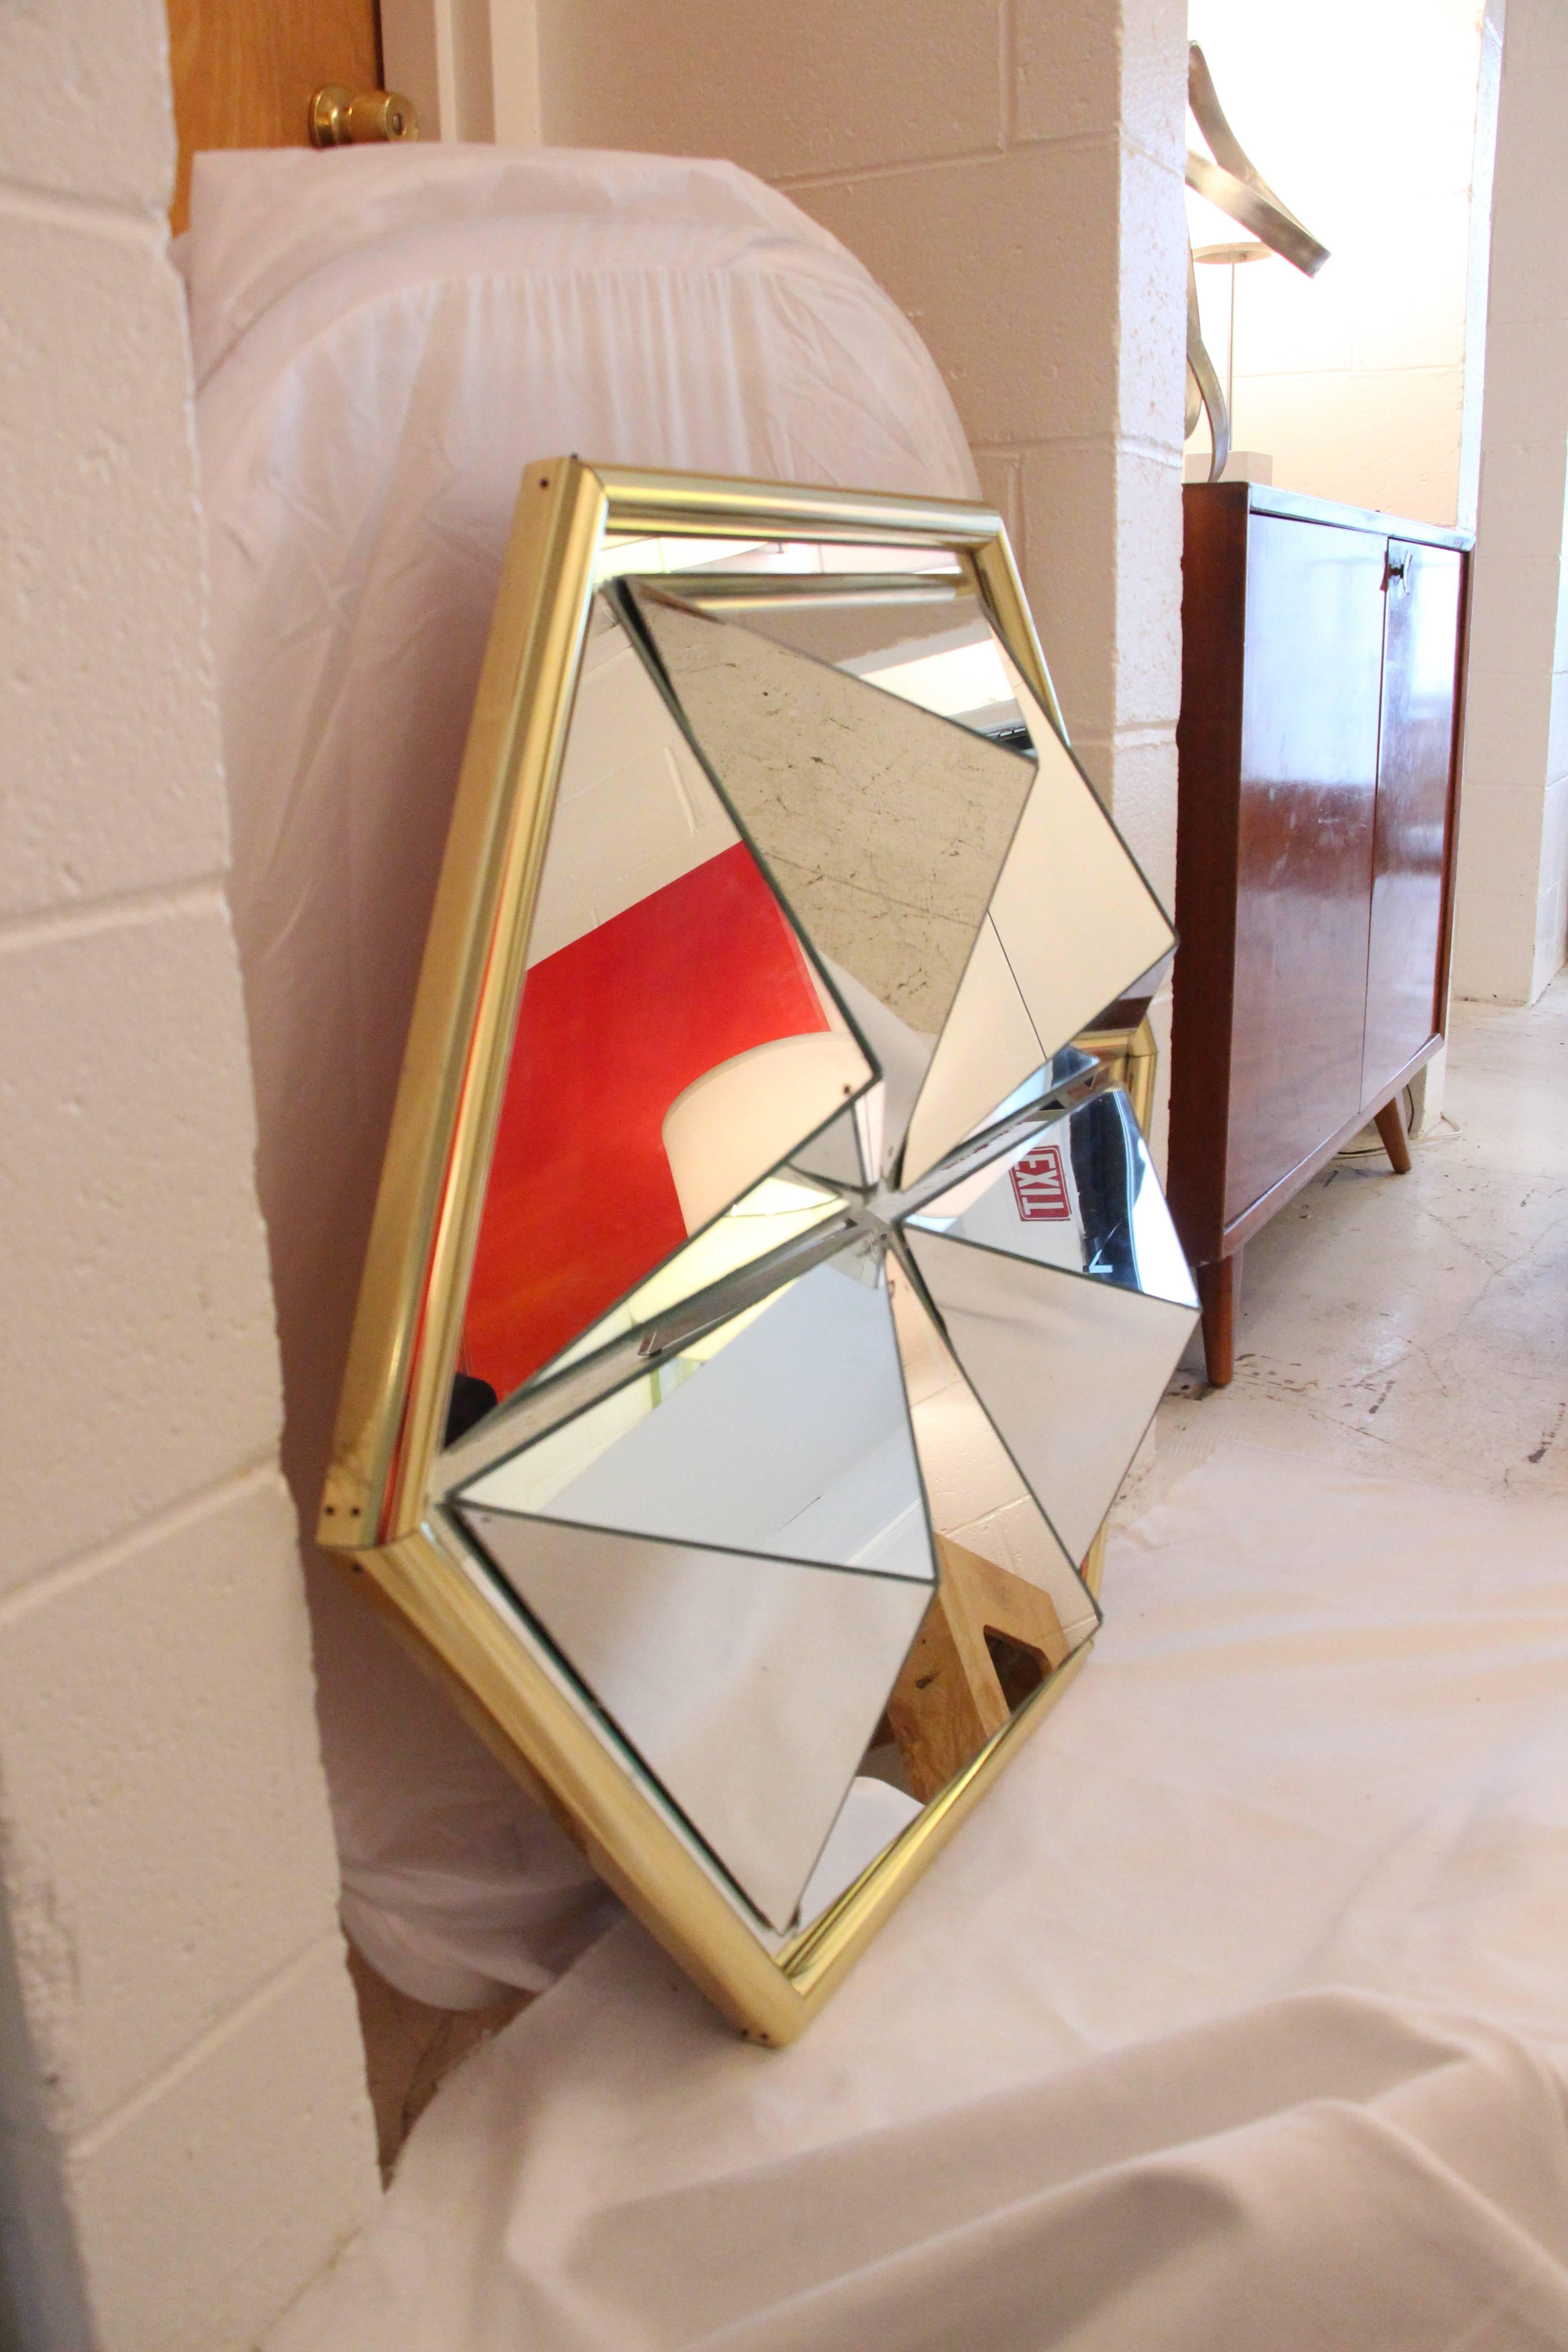 Fantastic prism mirror with a heavy brass sculpted frame. Geometric faceted panels give the mirror 5' of depth. There are some age spots on a few of the panels but in our opinion it adds interest.